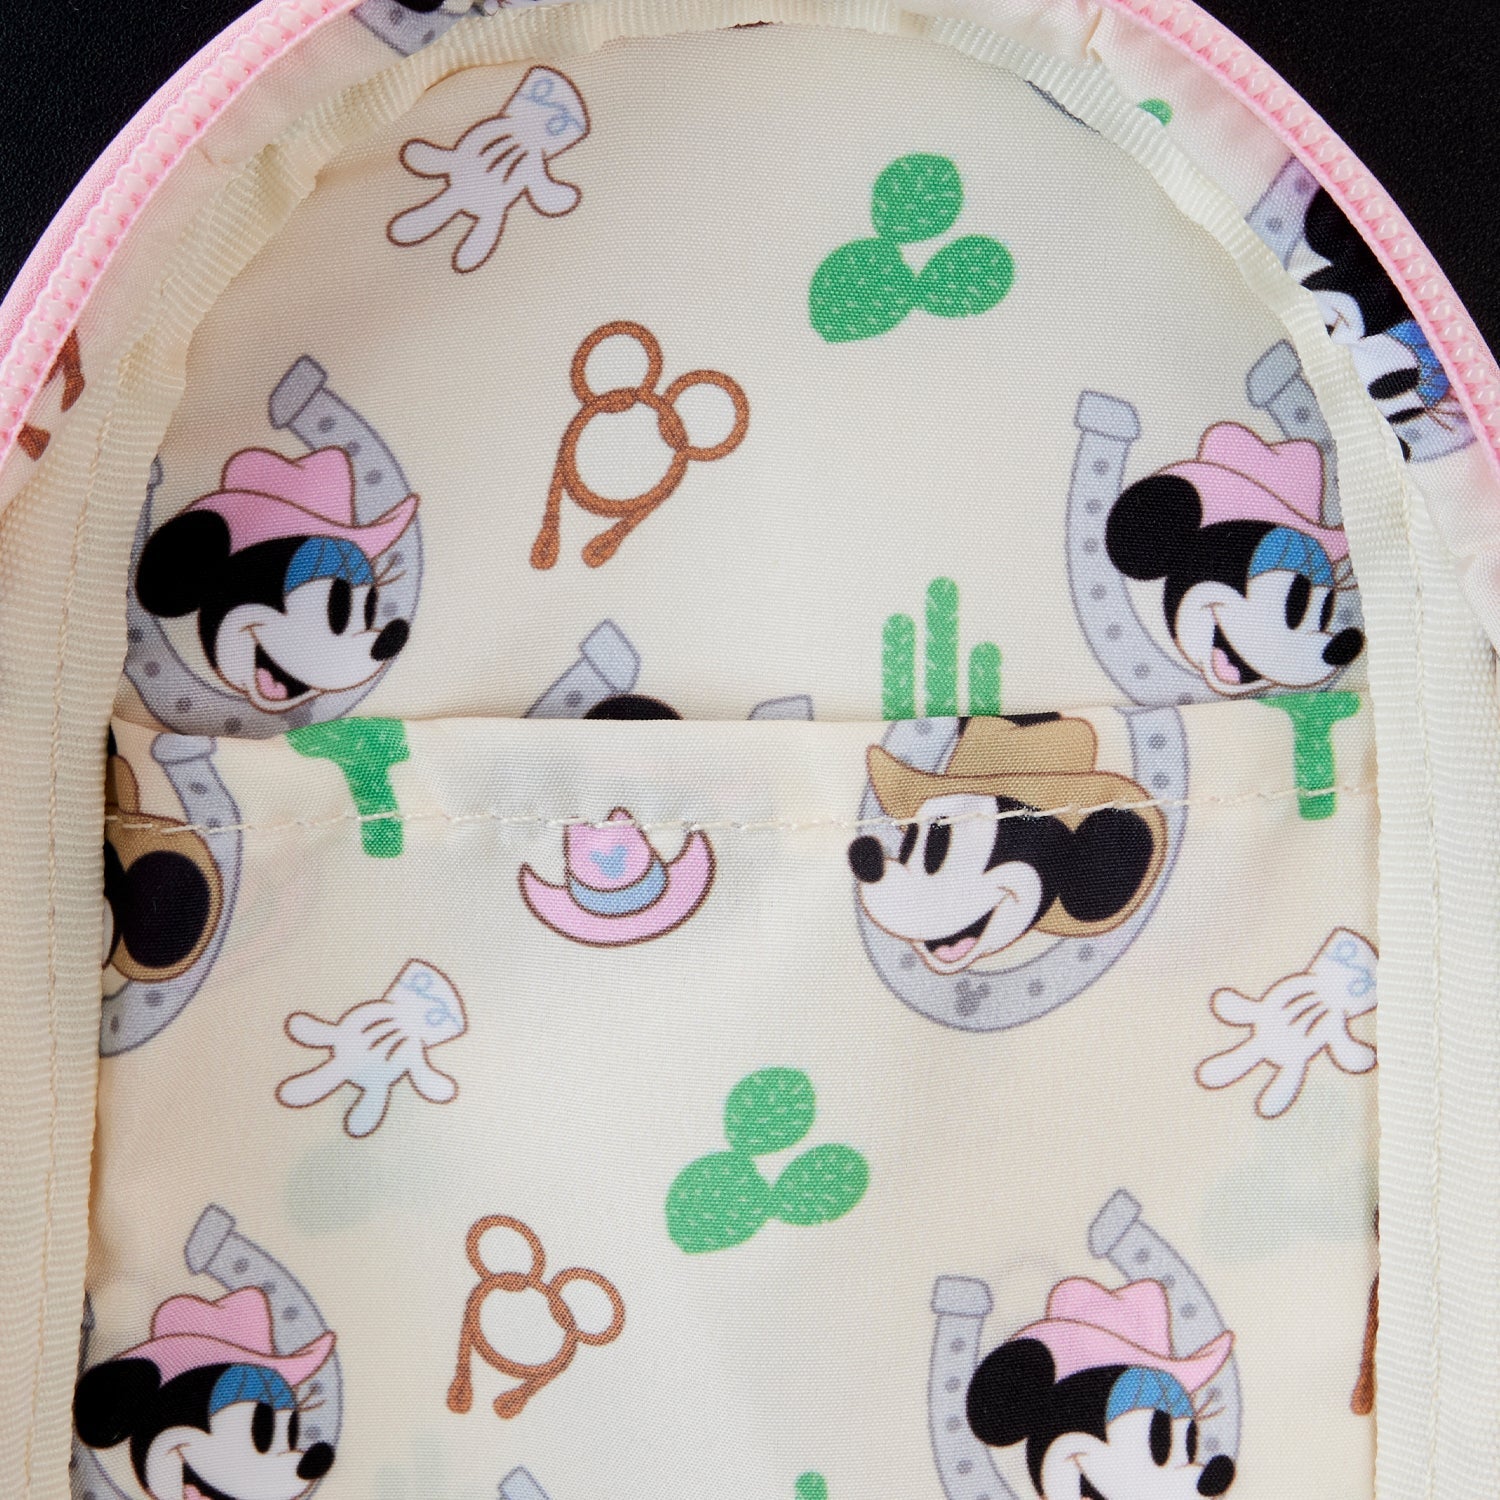 Loungefly x Disney Western Minnie Mouse Pencil Case - GeekCore